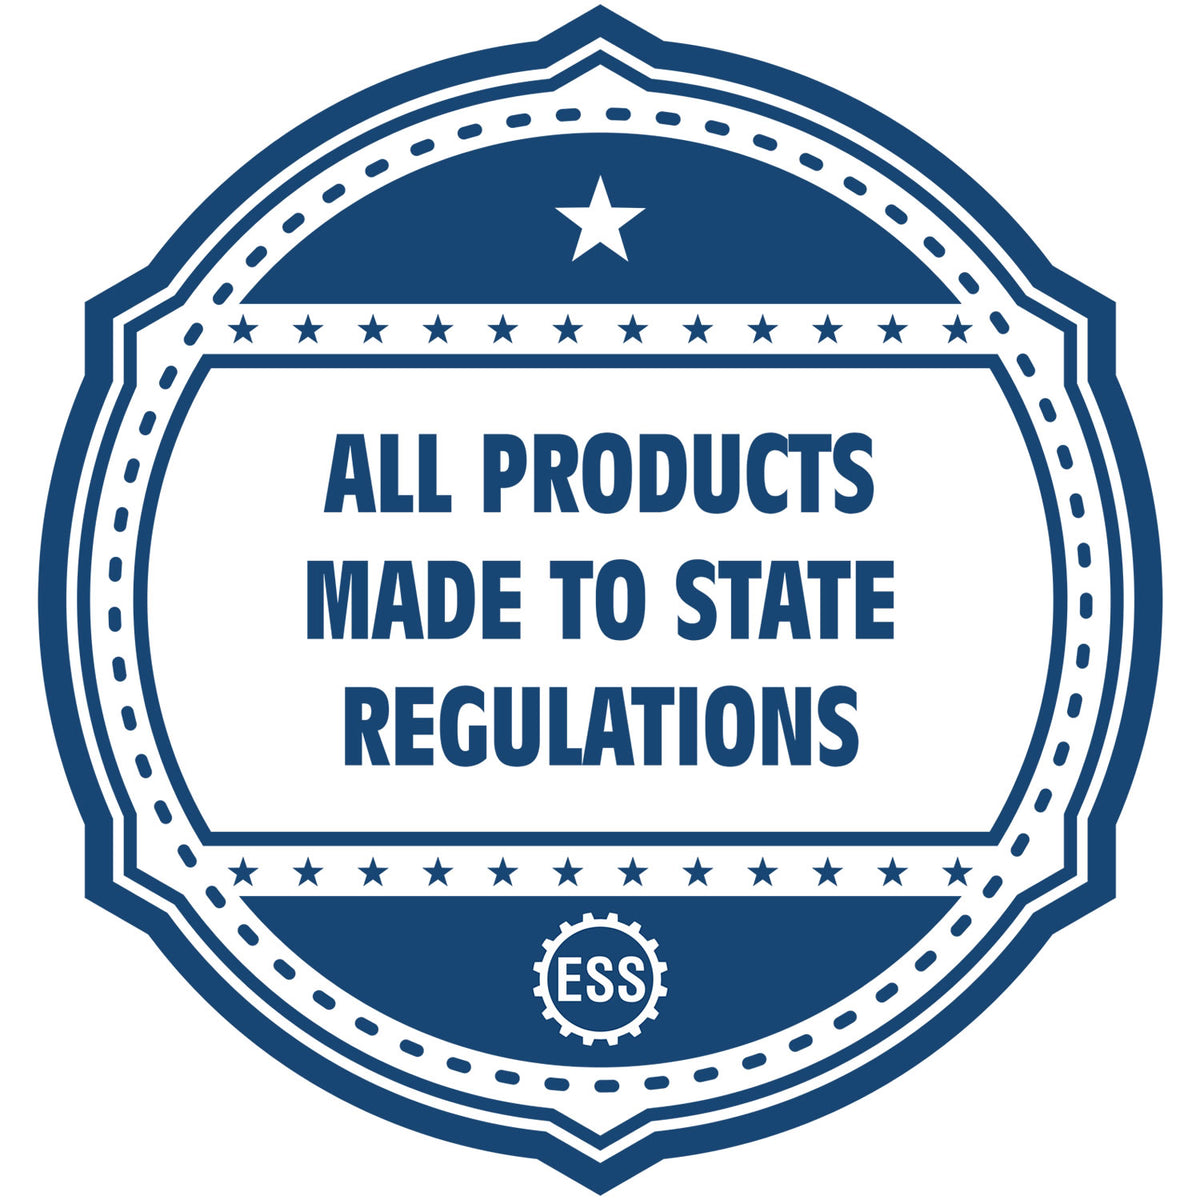 An icon or badge element for the Self-Inking Wyoming PE Stamp showing that this product is made in compliance with state regulations.